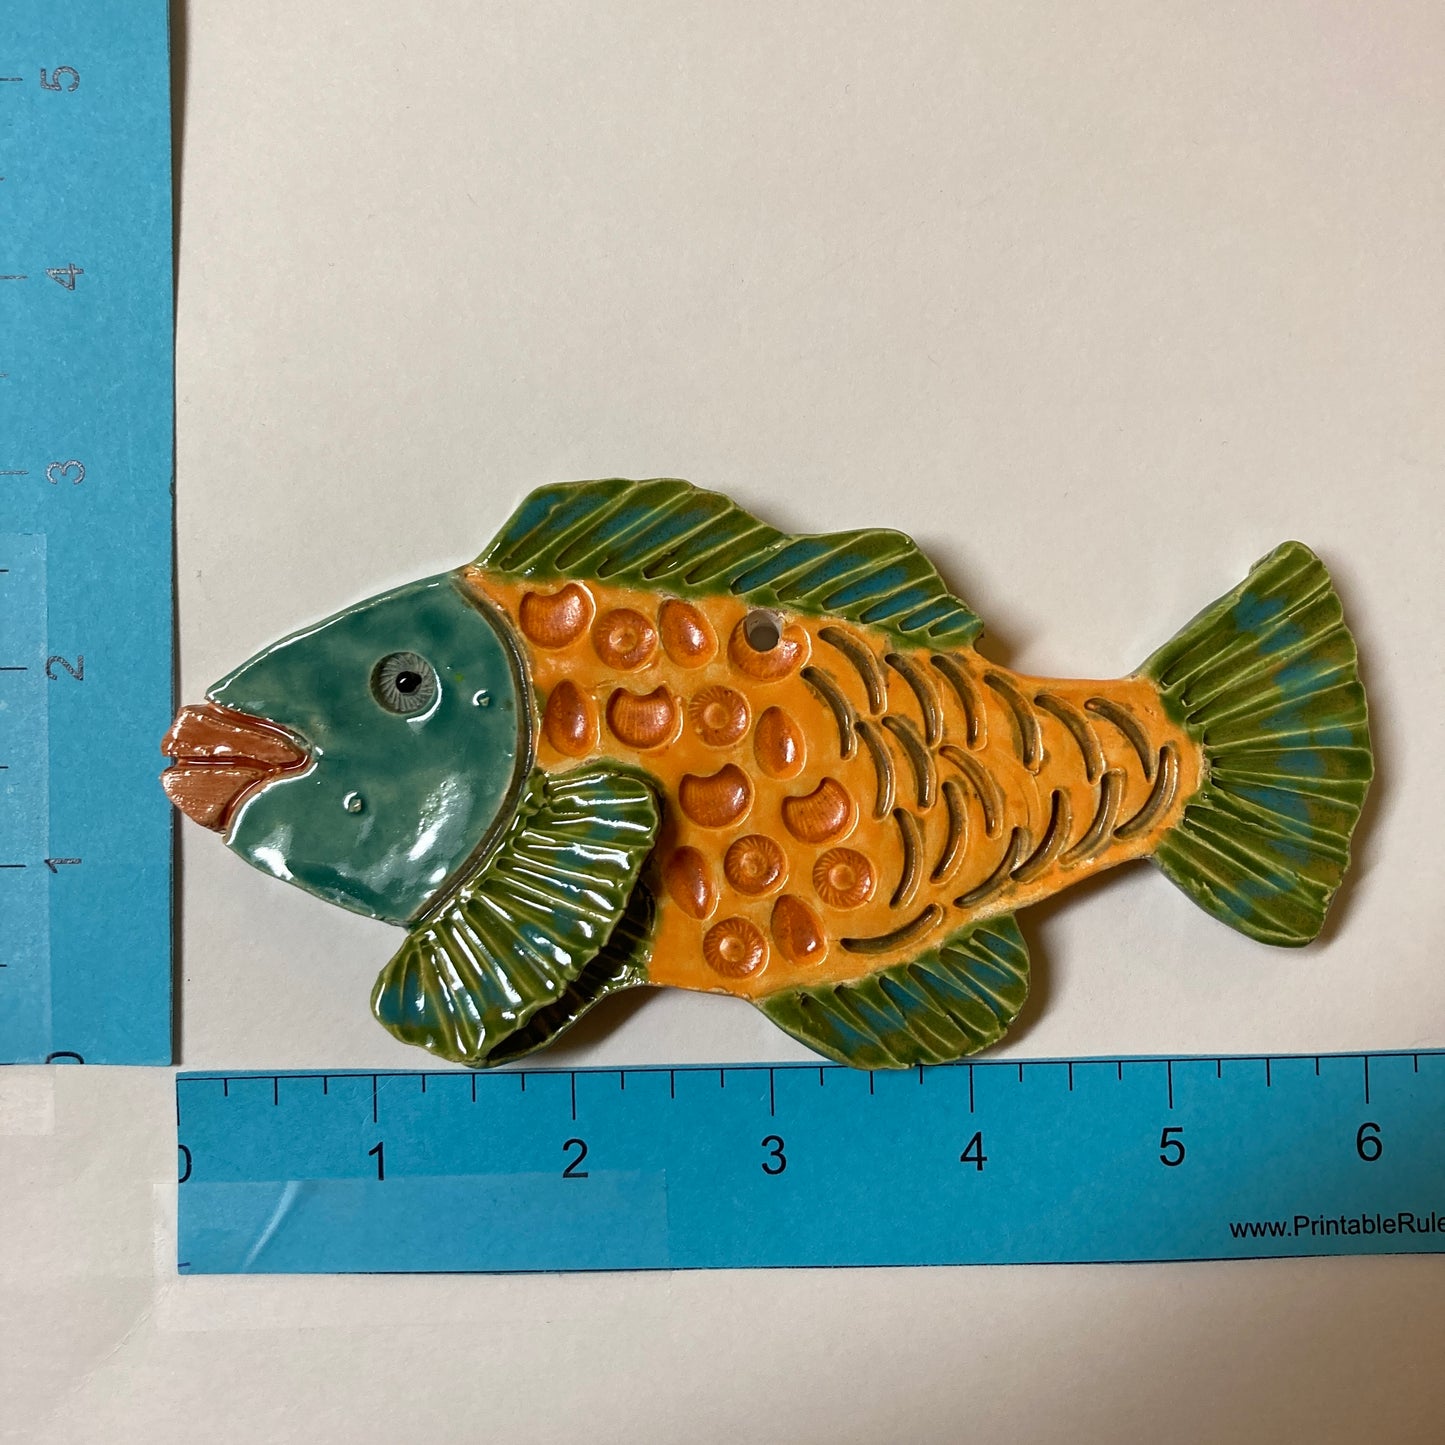 WATCH Resources Art Guild - Ceramic Arts Handmade Clay Crafts Fresh Fish 6-inch x 3-inch Glazed Fish made by Ryan Imhoff